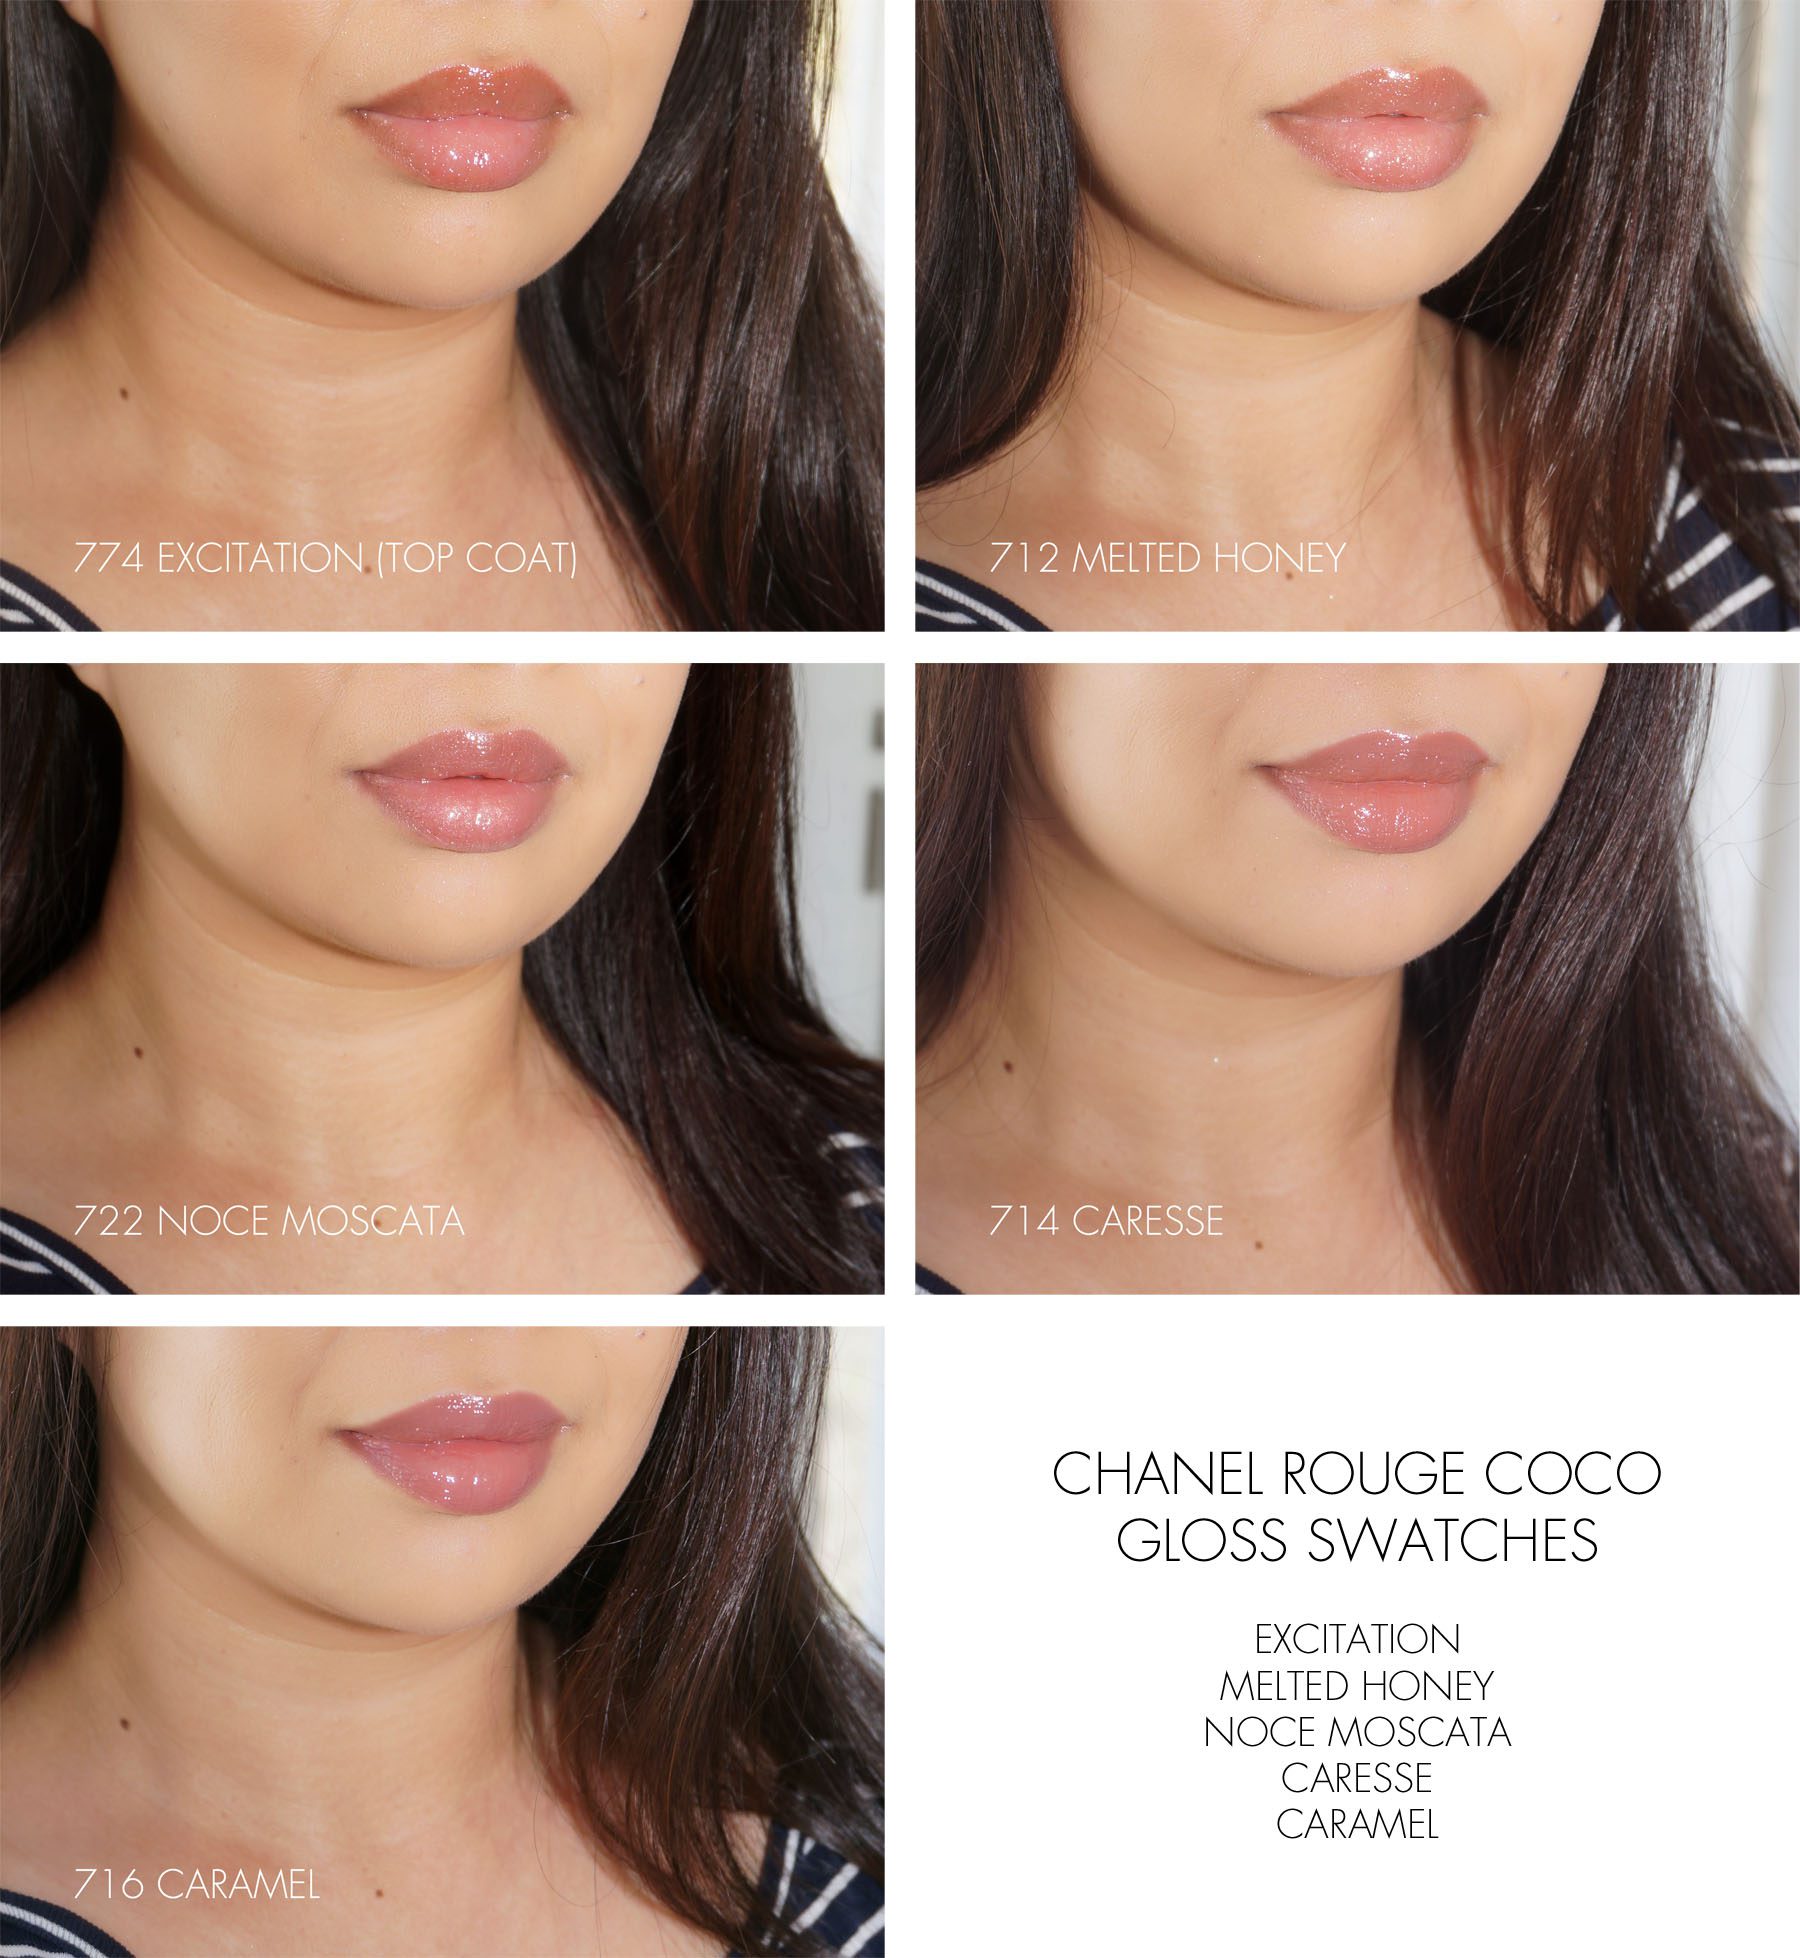 Rouge Coco Gloss Archives - The Beauty Look Book